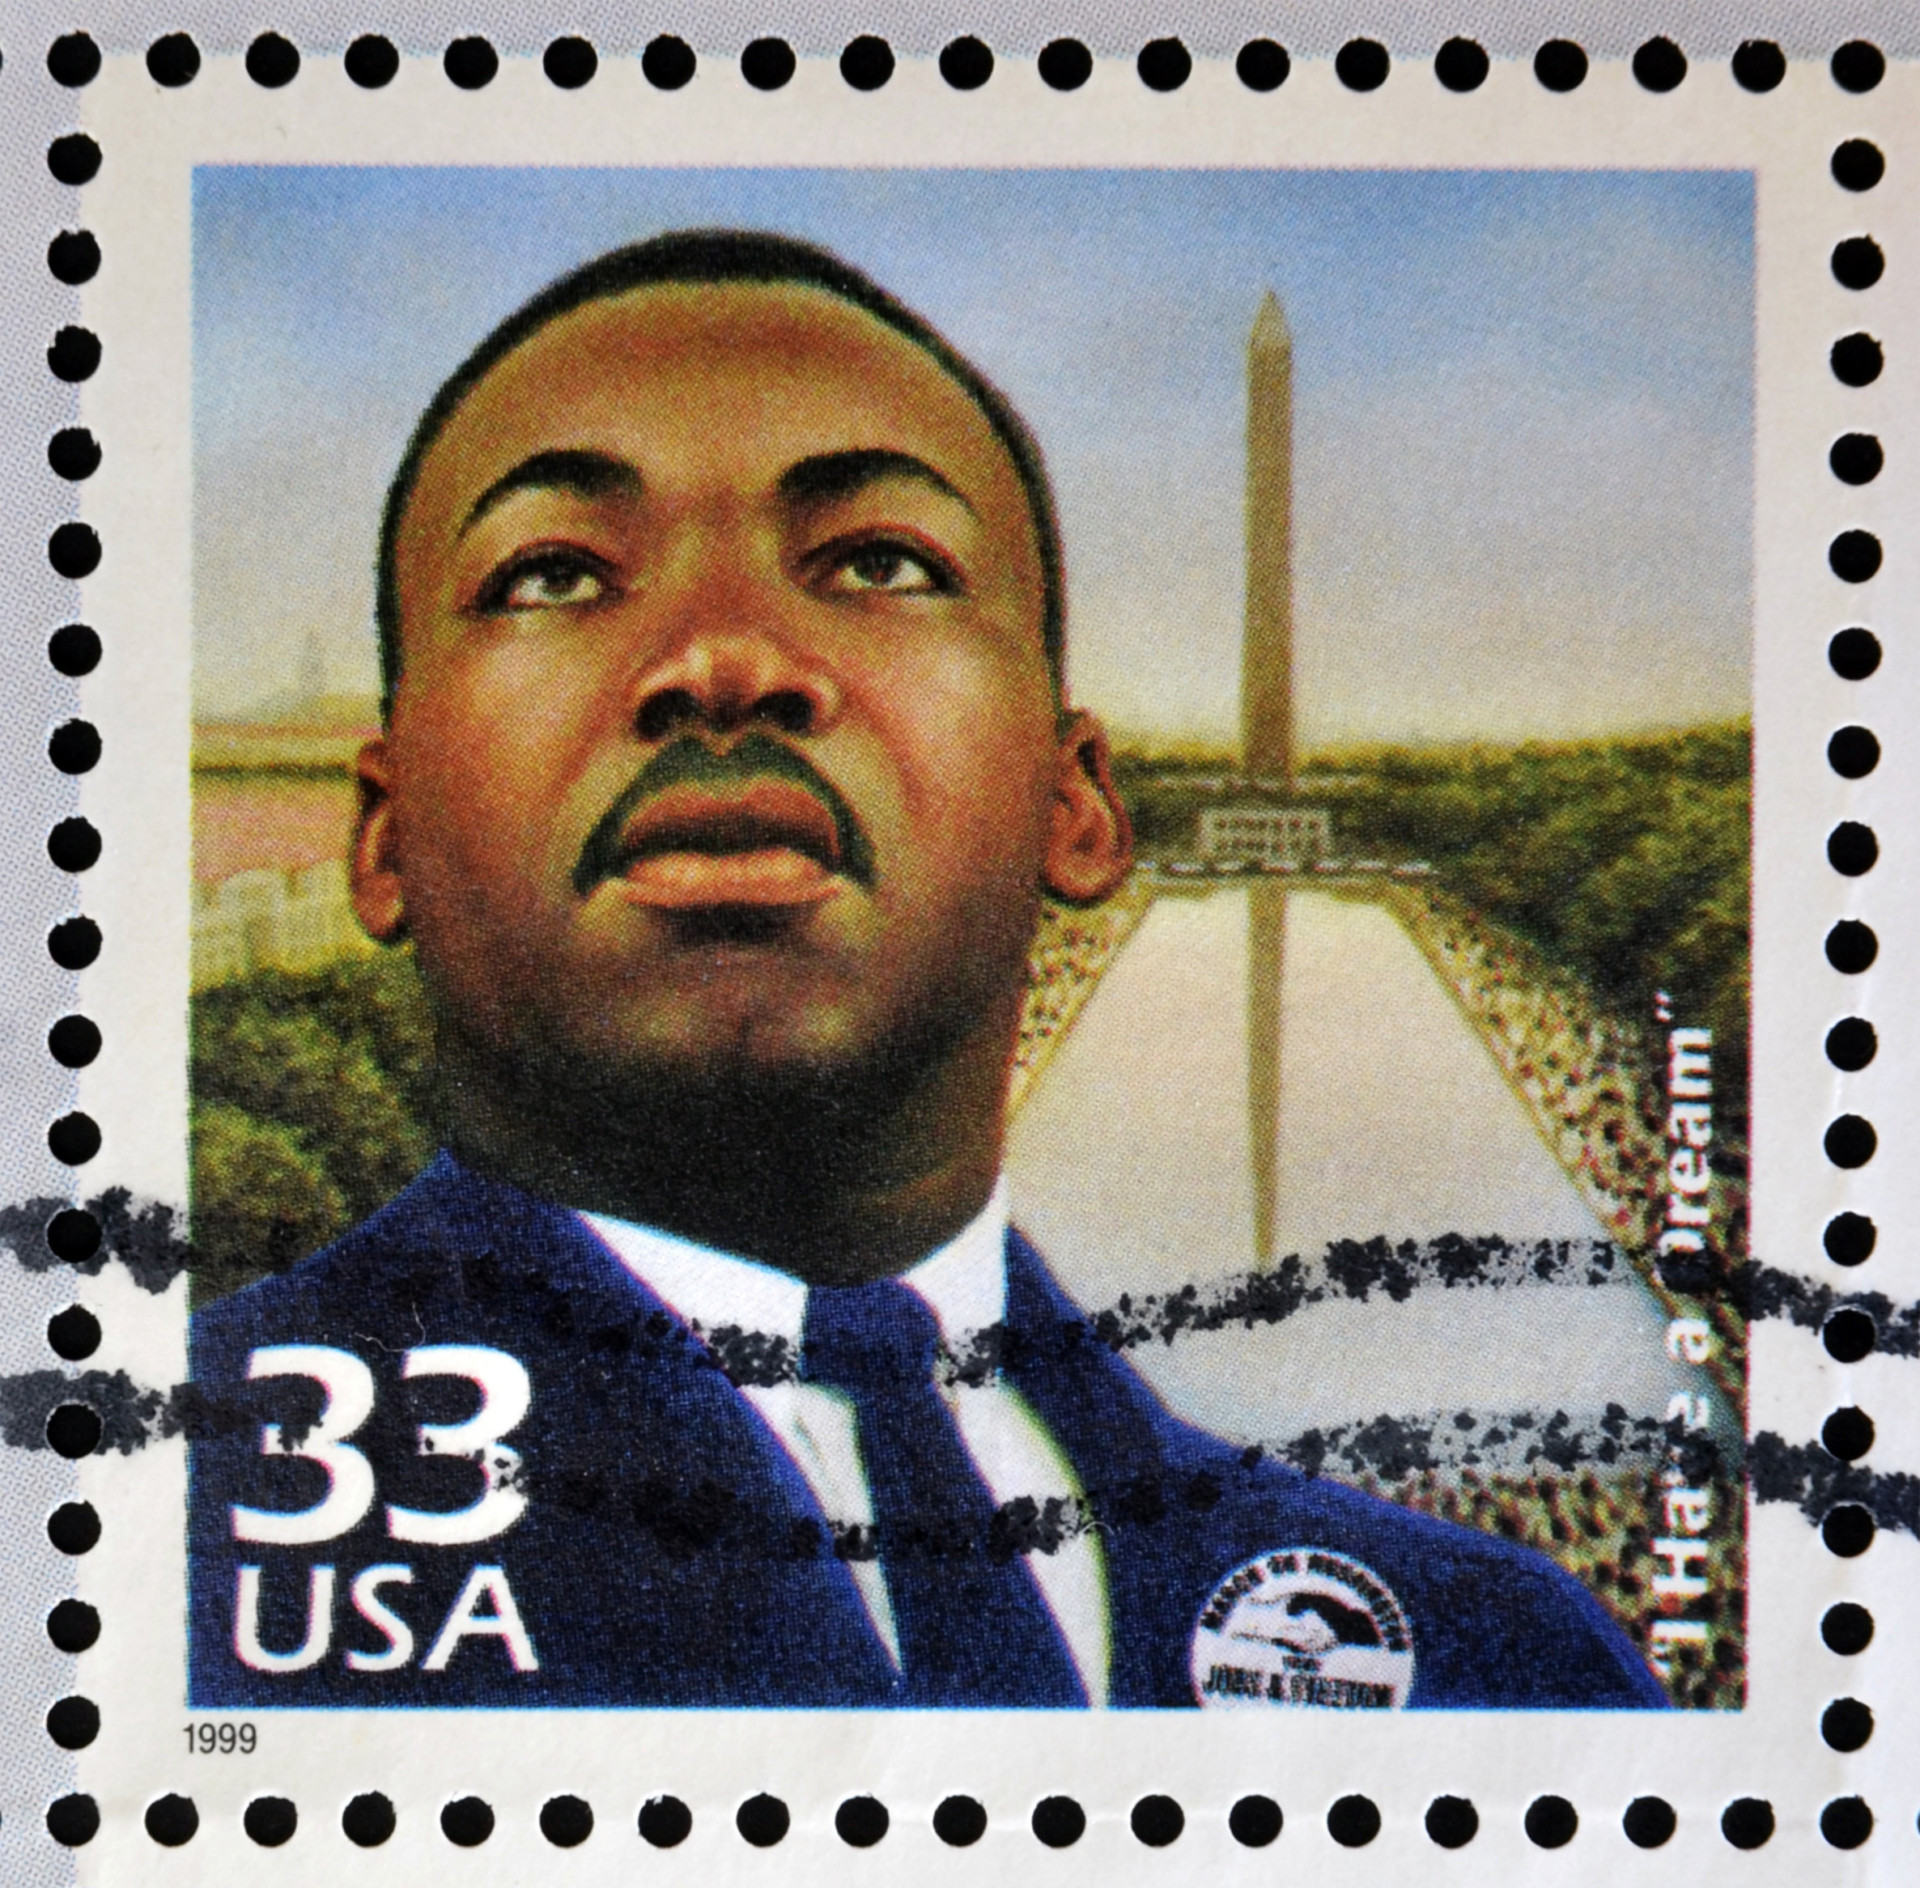 The 1999 "I Have a Dream" stamp was issued in September of that year, 20 years after the "Black Heritage Series" stamp was issued.<p>You may also like:<a href="https://www.starsinsider.com/n/409402?utm_source=msn.com&utm_medium=display&utm_campaign=referral_description&utm_content=347864v15en-us"> Nickelodeon stars: Then and now </a></p>